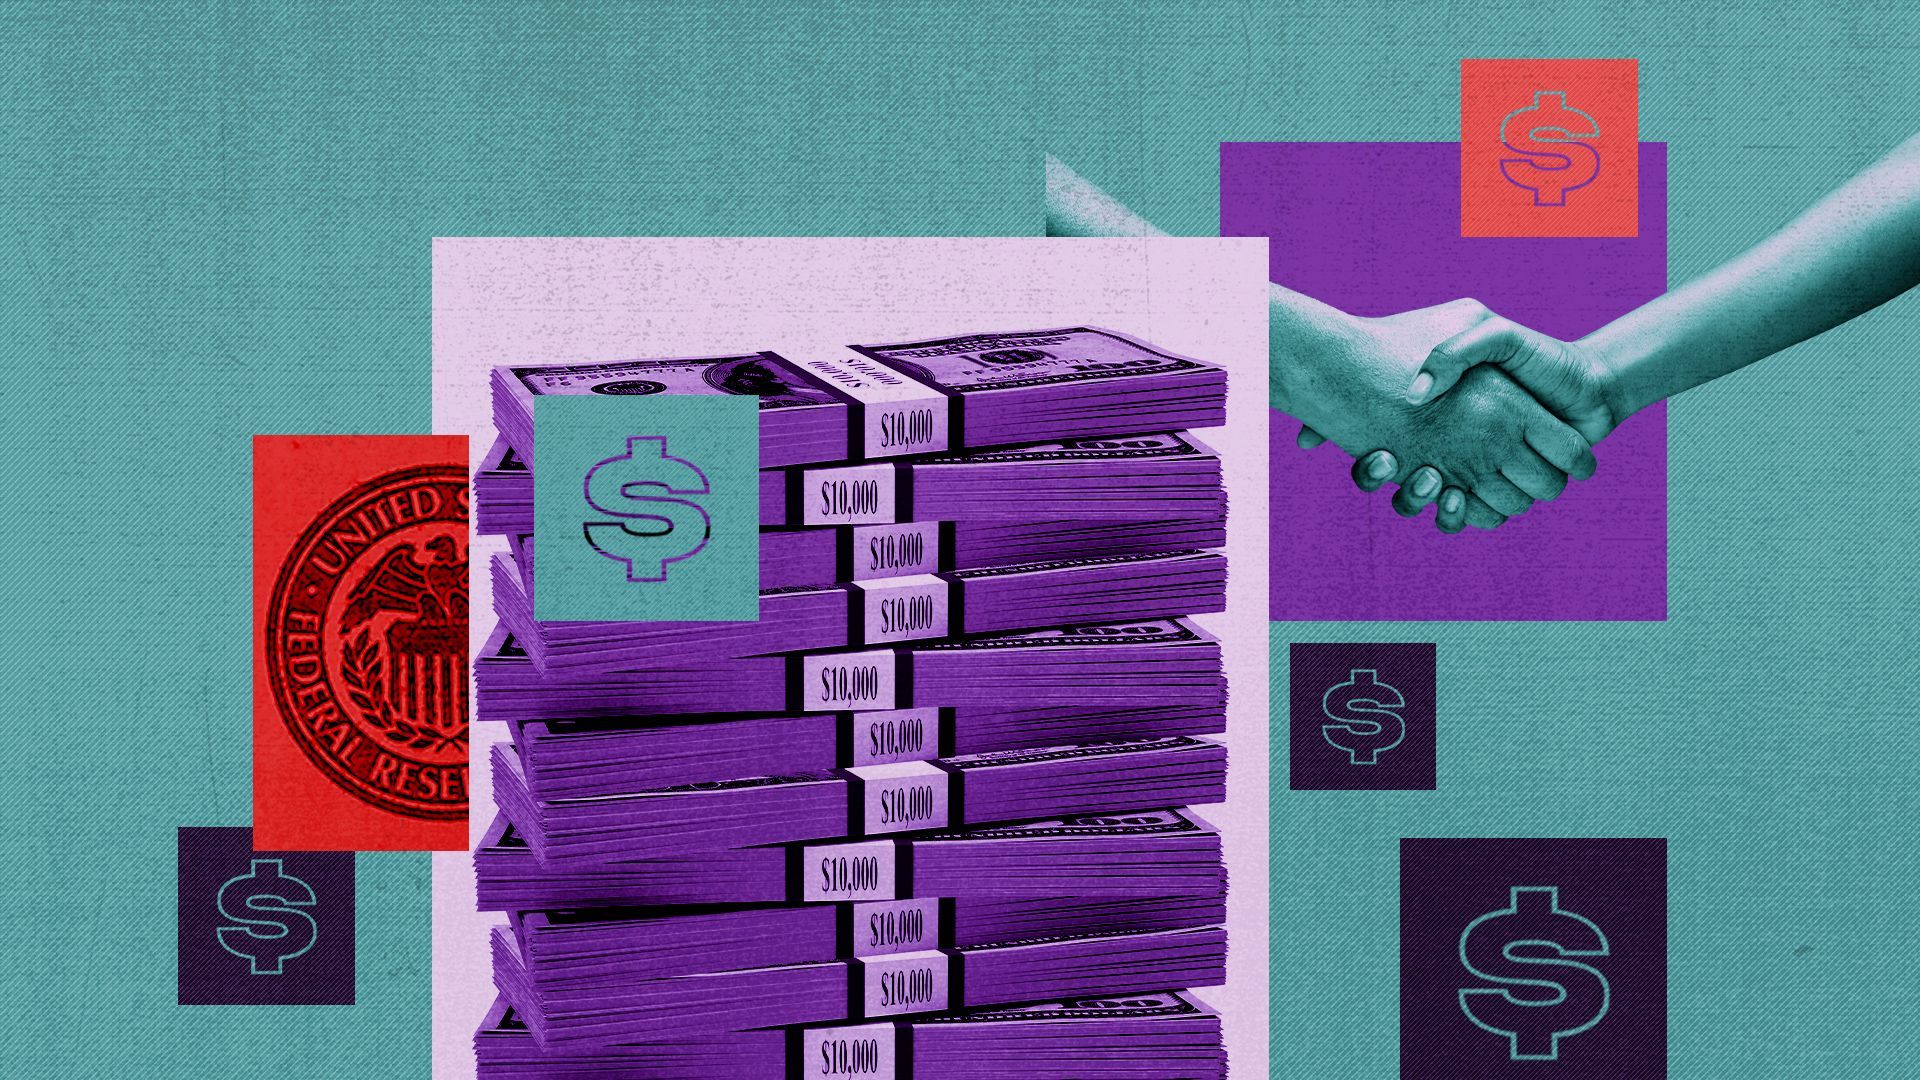 Illustration of a stack of money and a handshake surrounded by abstract shapes and money elements.